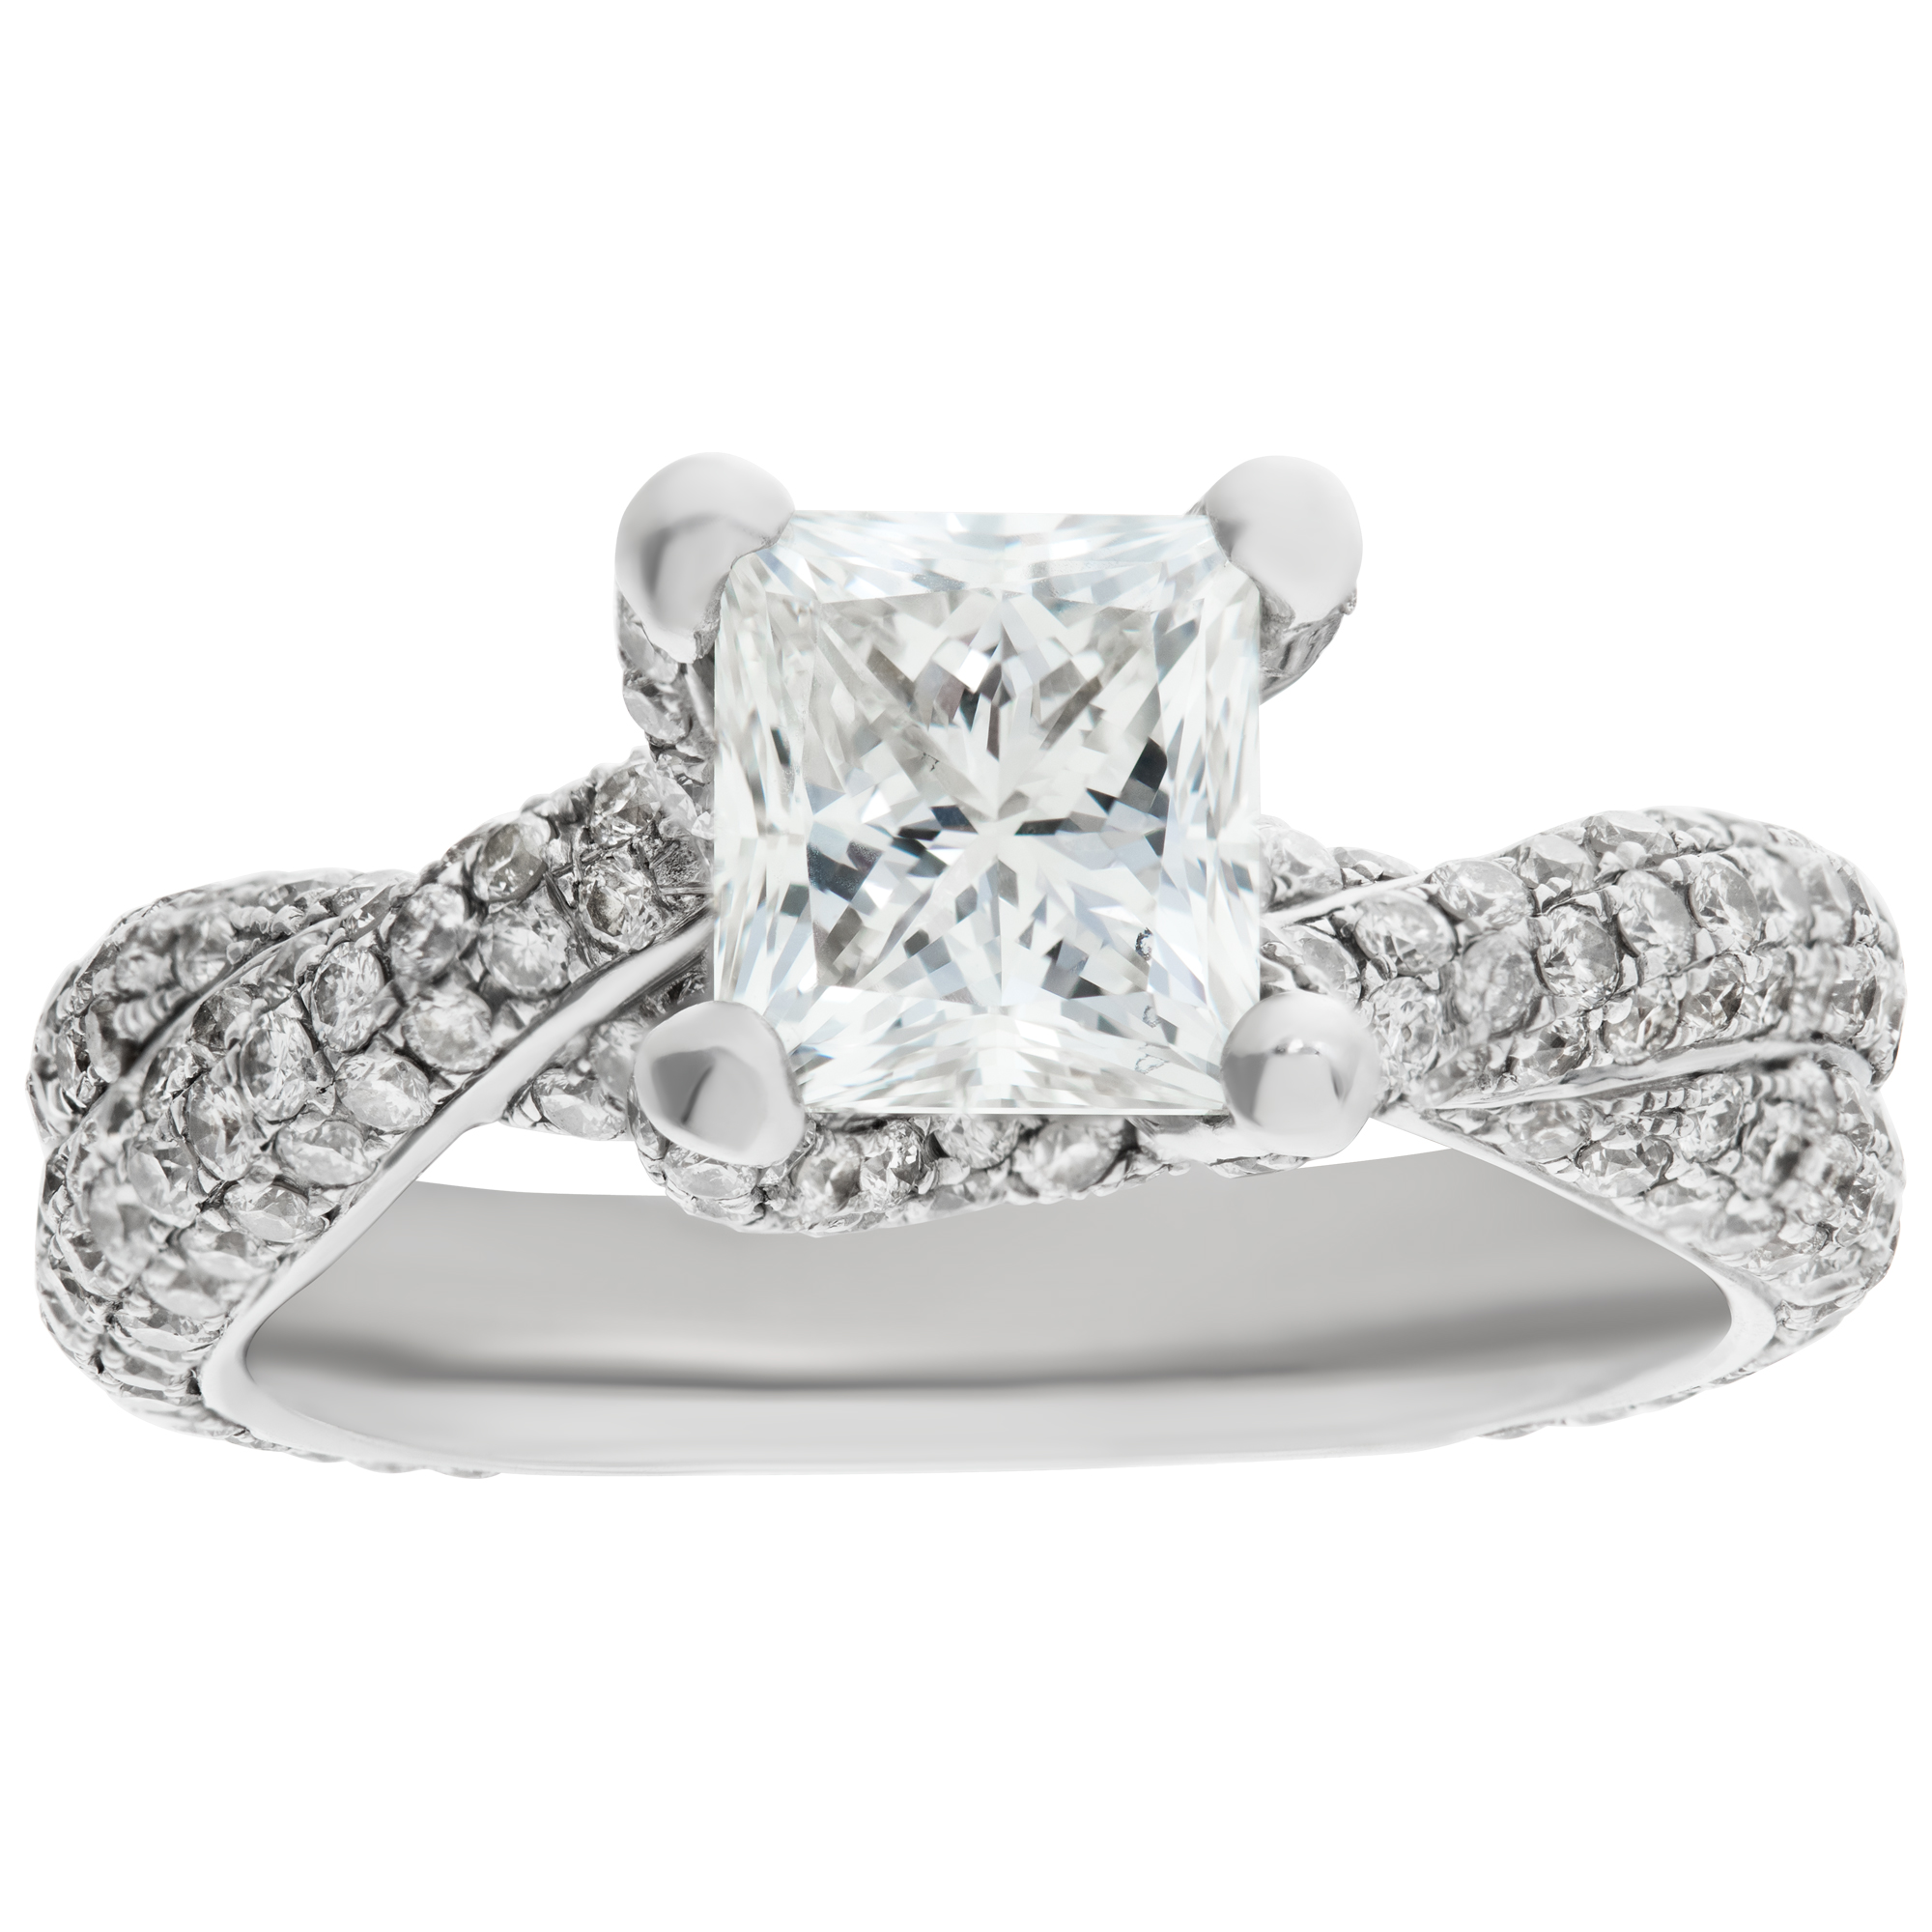 GIA certified rectangular diamond ring 1.53 cts (I Color, VS2 Clarity) set in micro pave diamond 18k white gold. image 1